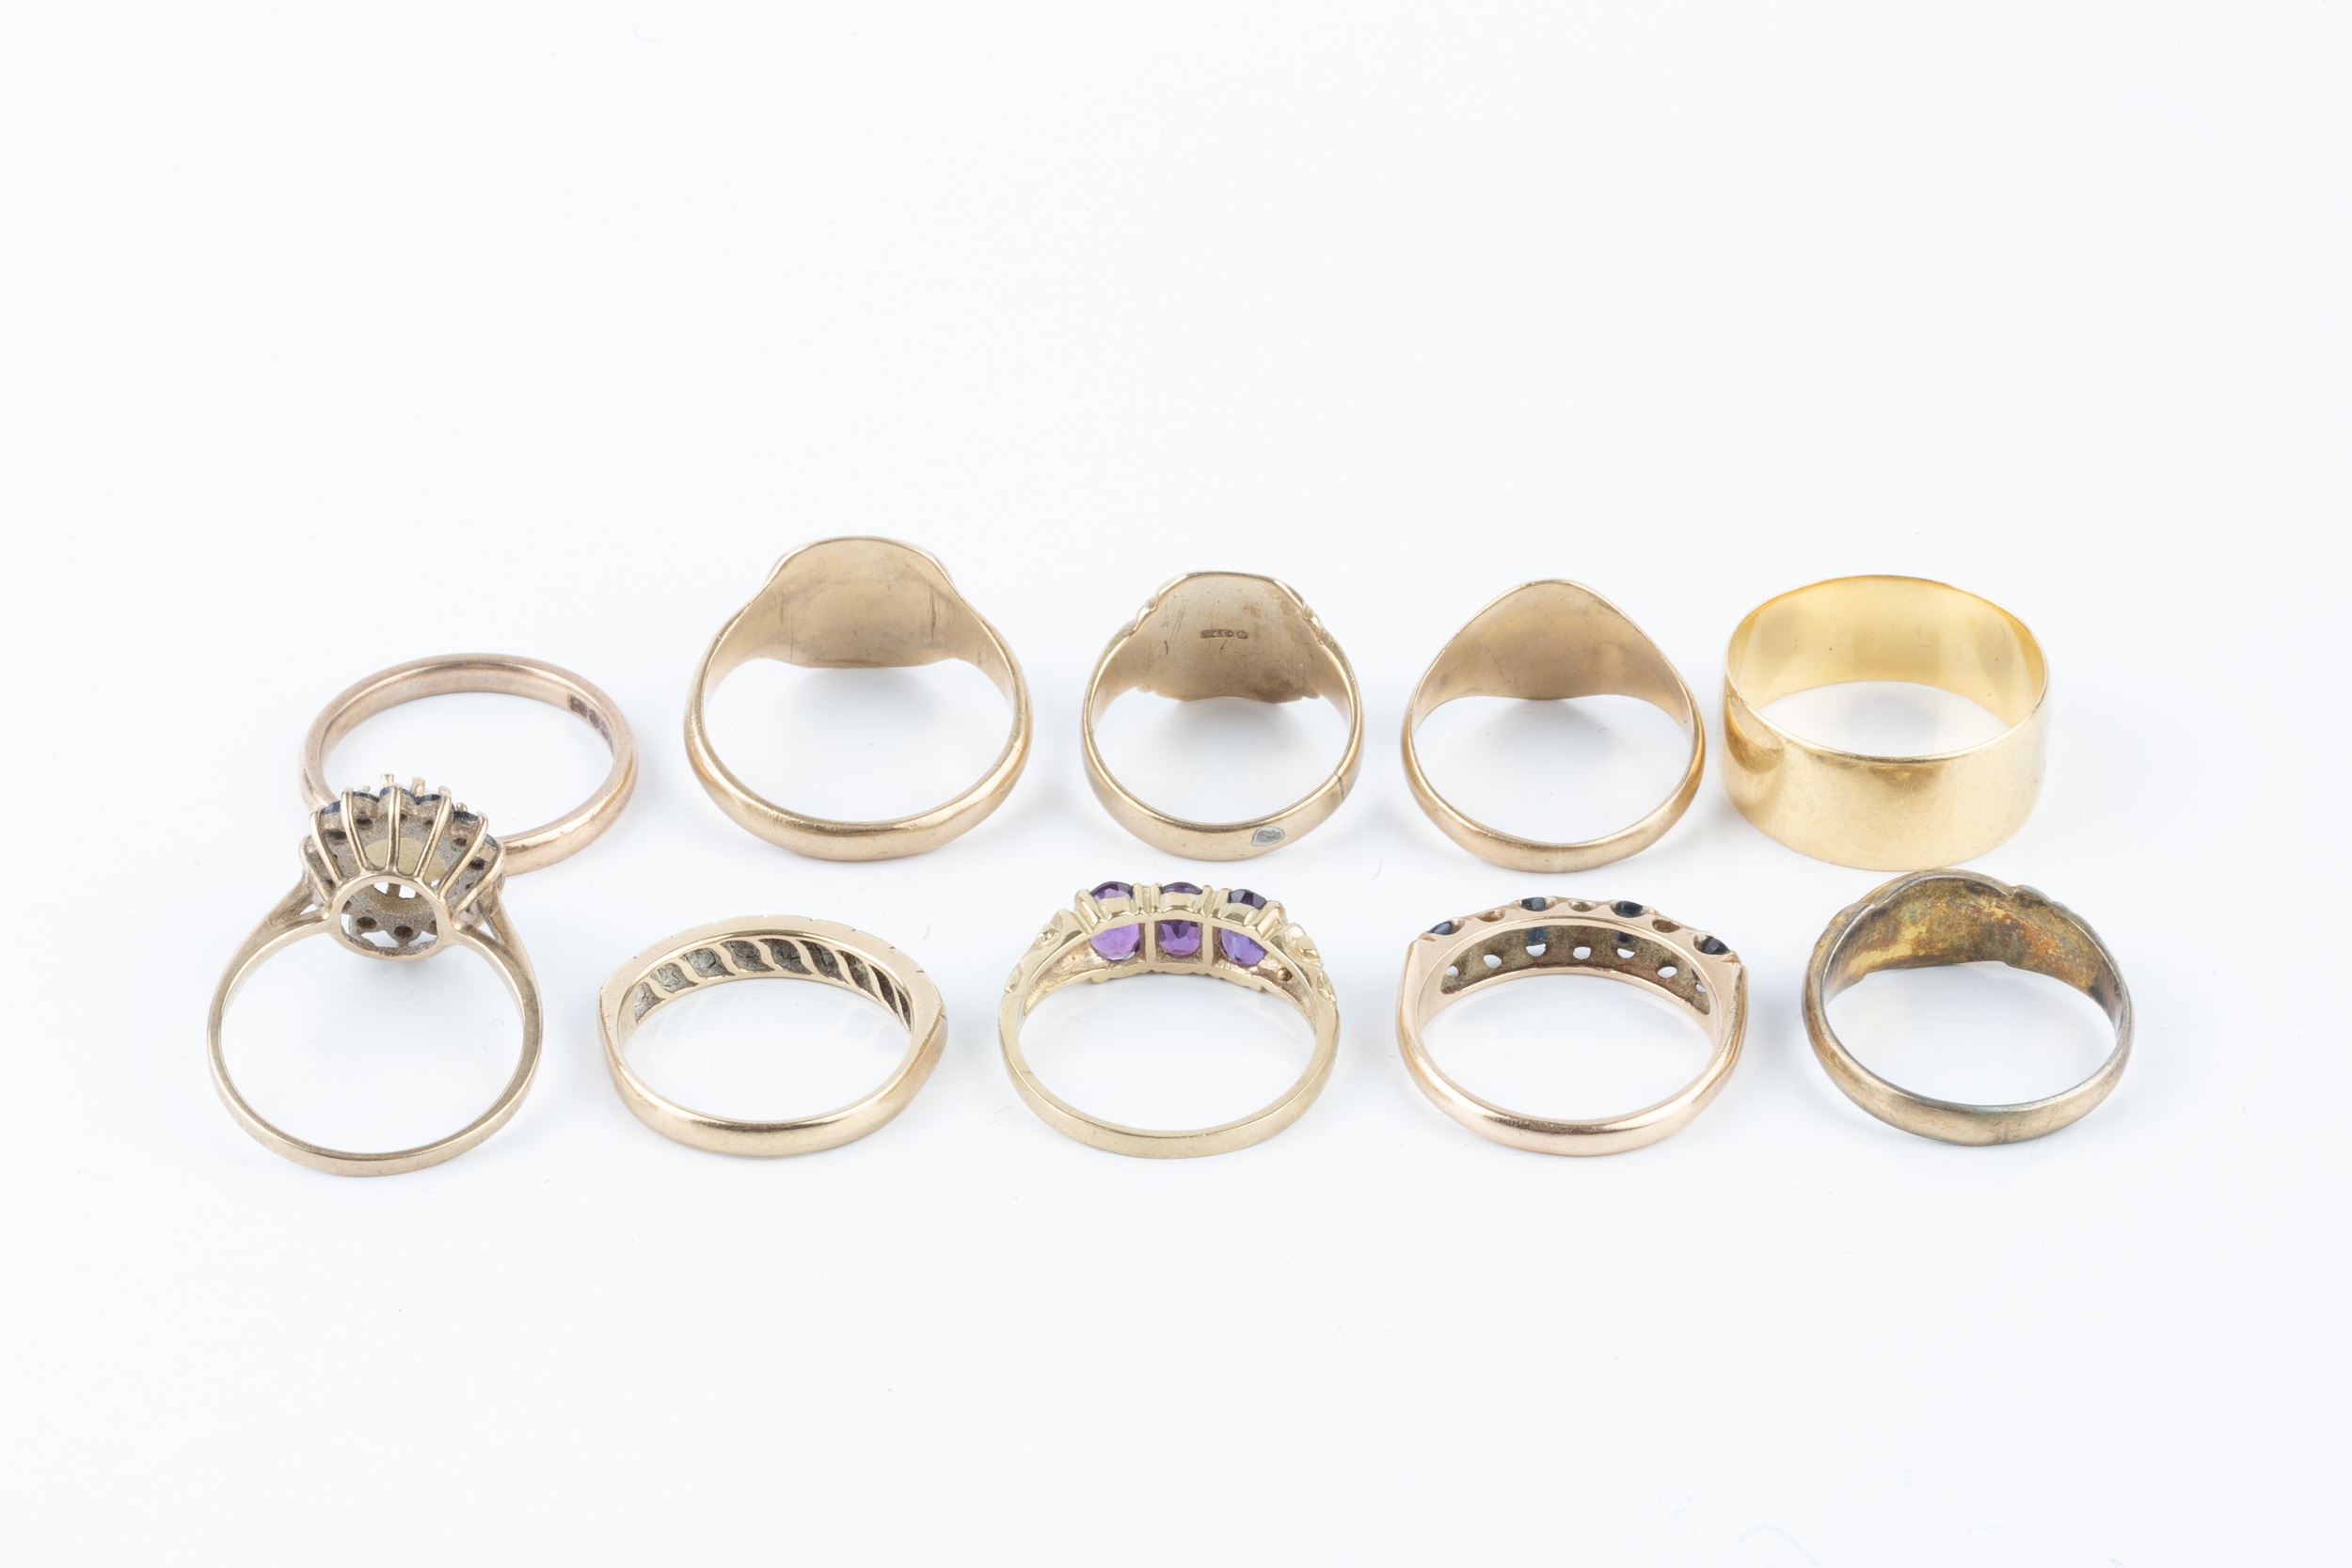 An 18ct gold wedding band, a 9ct gold wedding band, and three 9ct gold signet rings, together with - Image 2 of 3